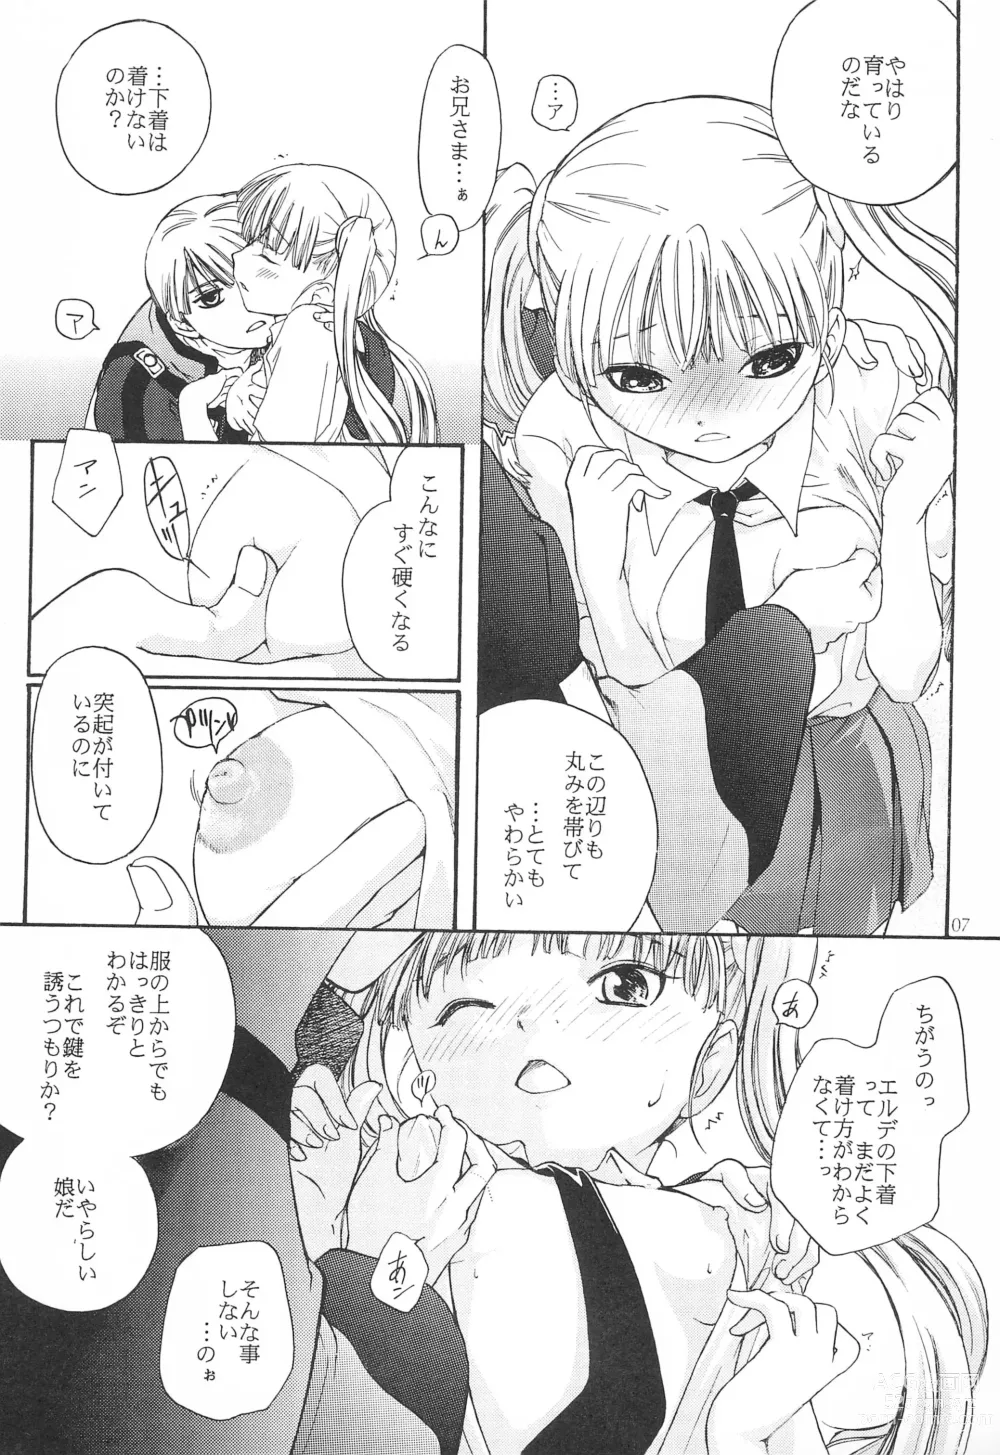 Page 7 of doujinshi Sweets home